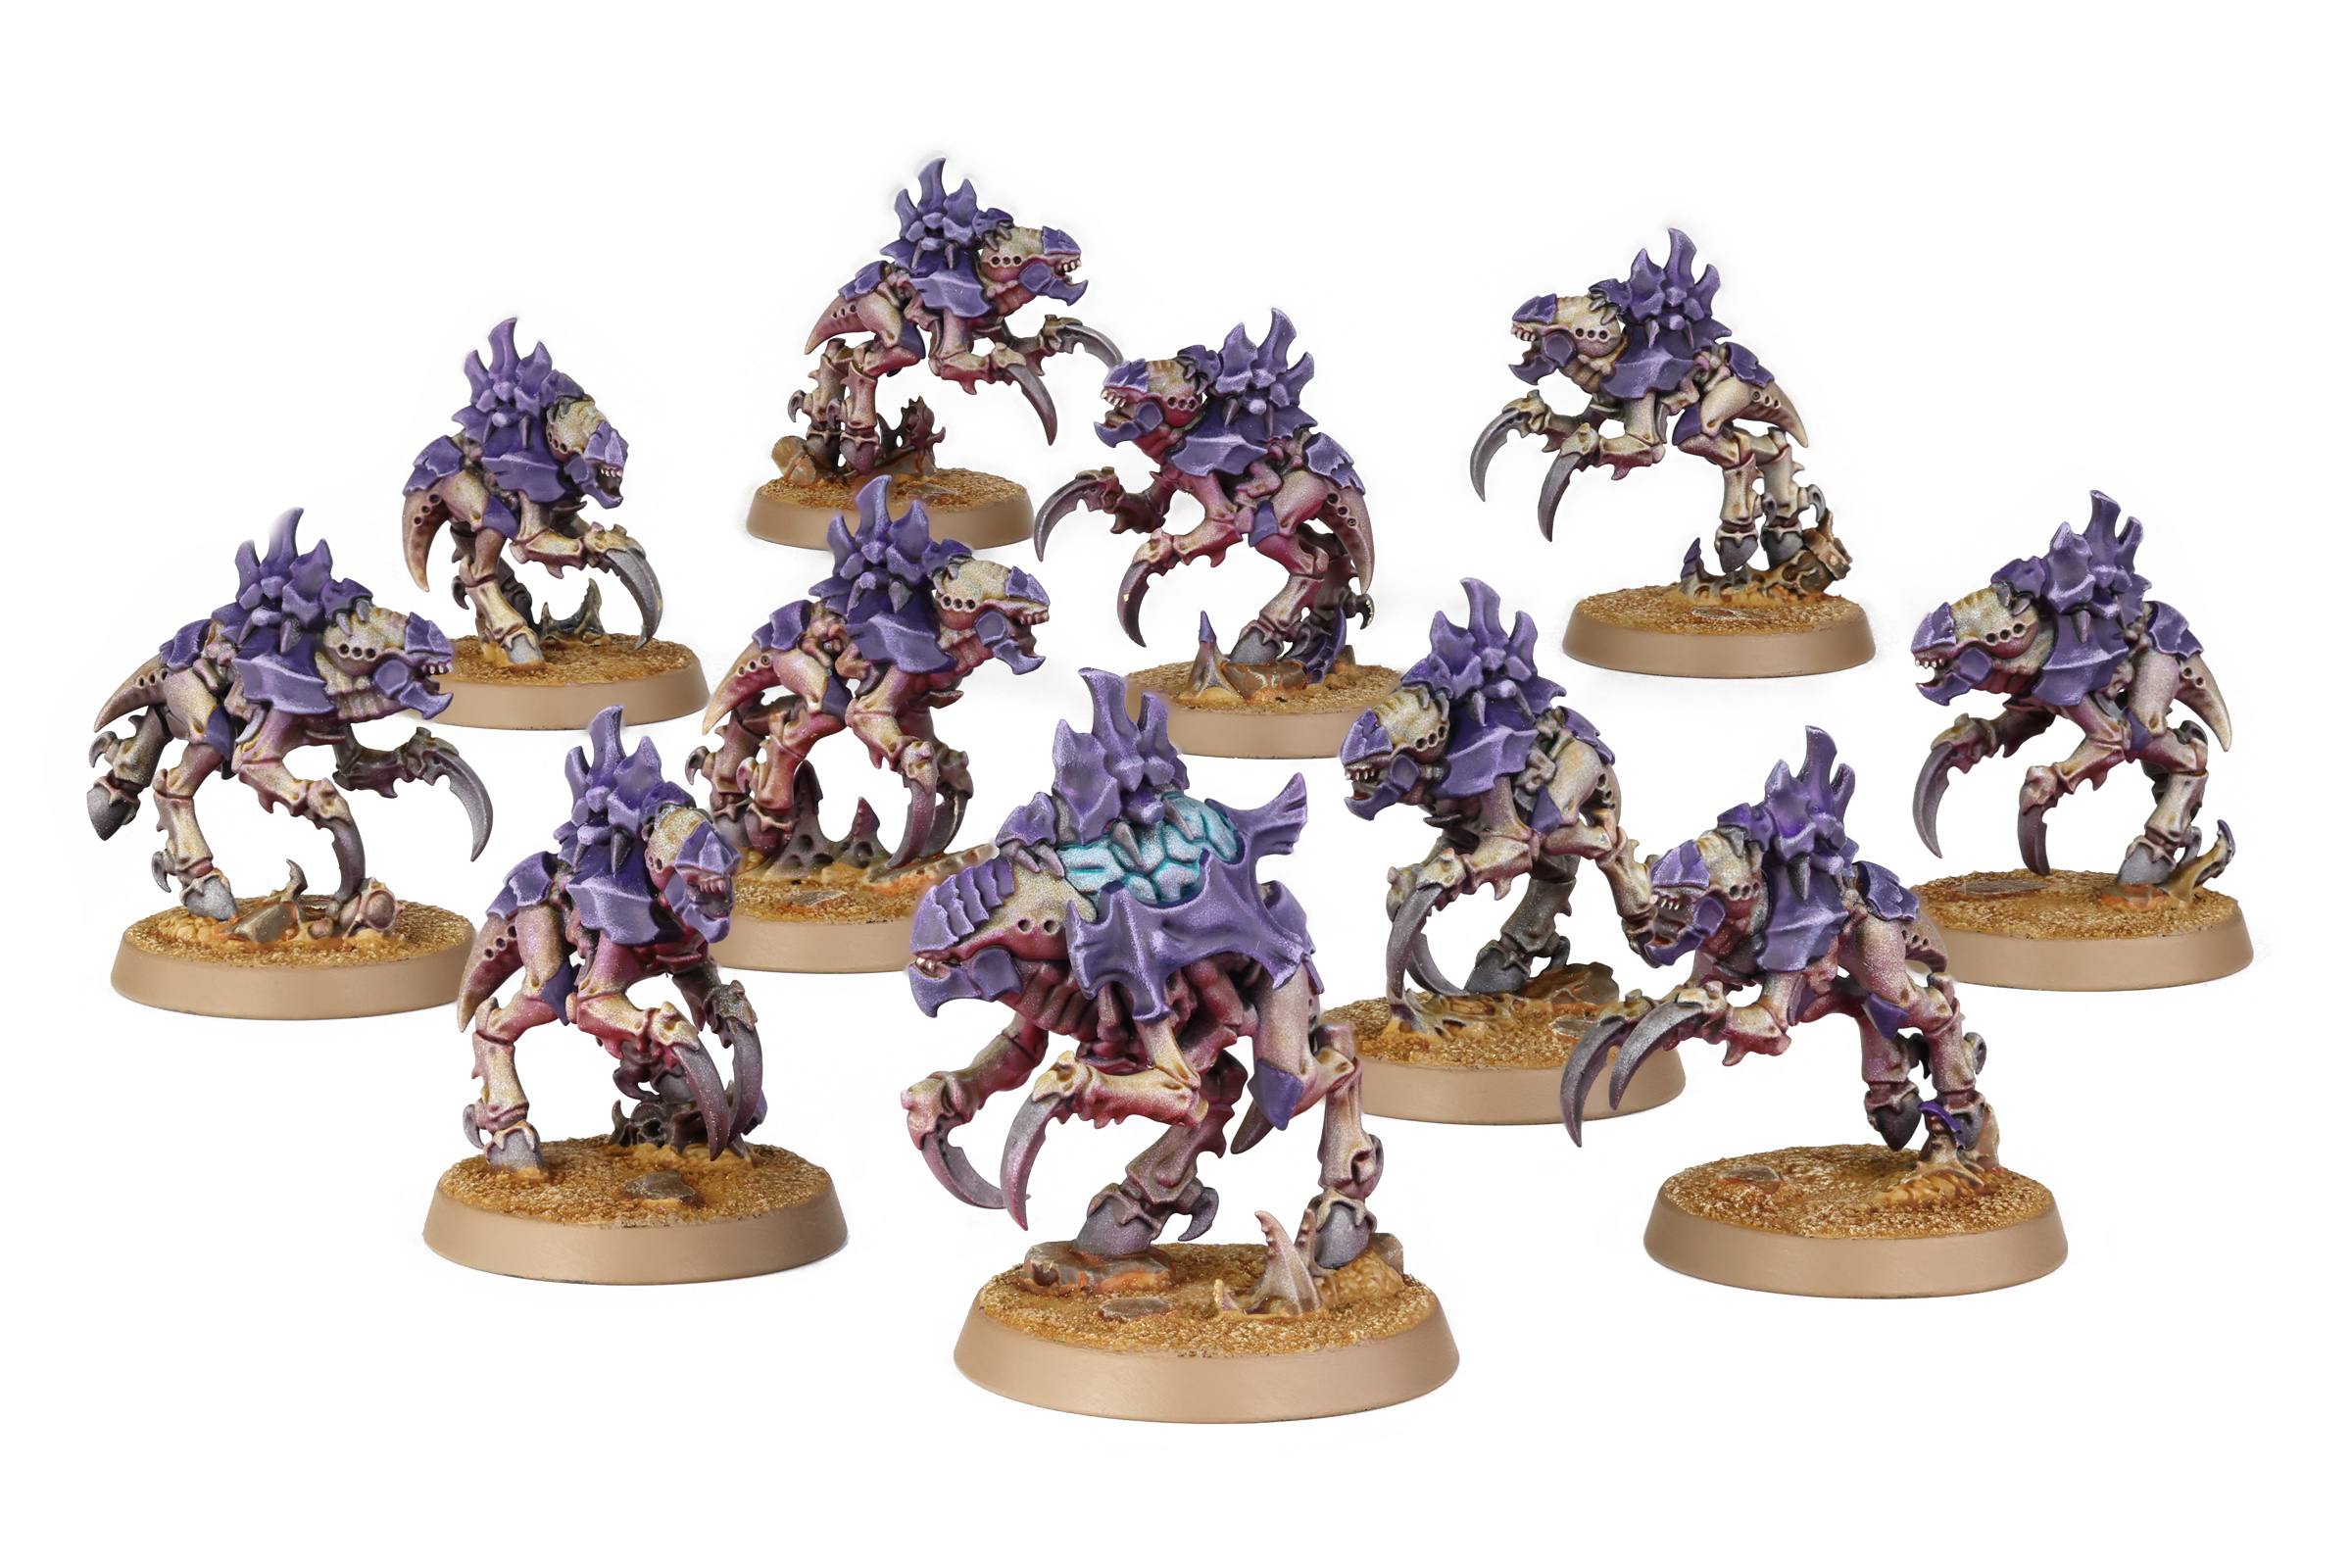 Review: New starter box from Warmachine and Hordes - Crit For Brains